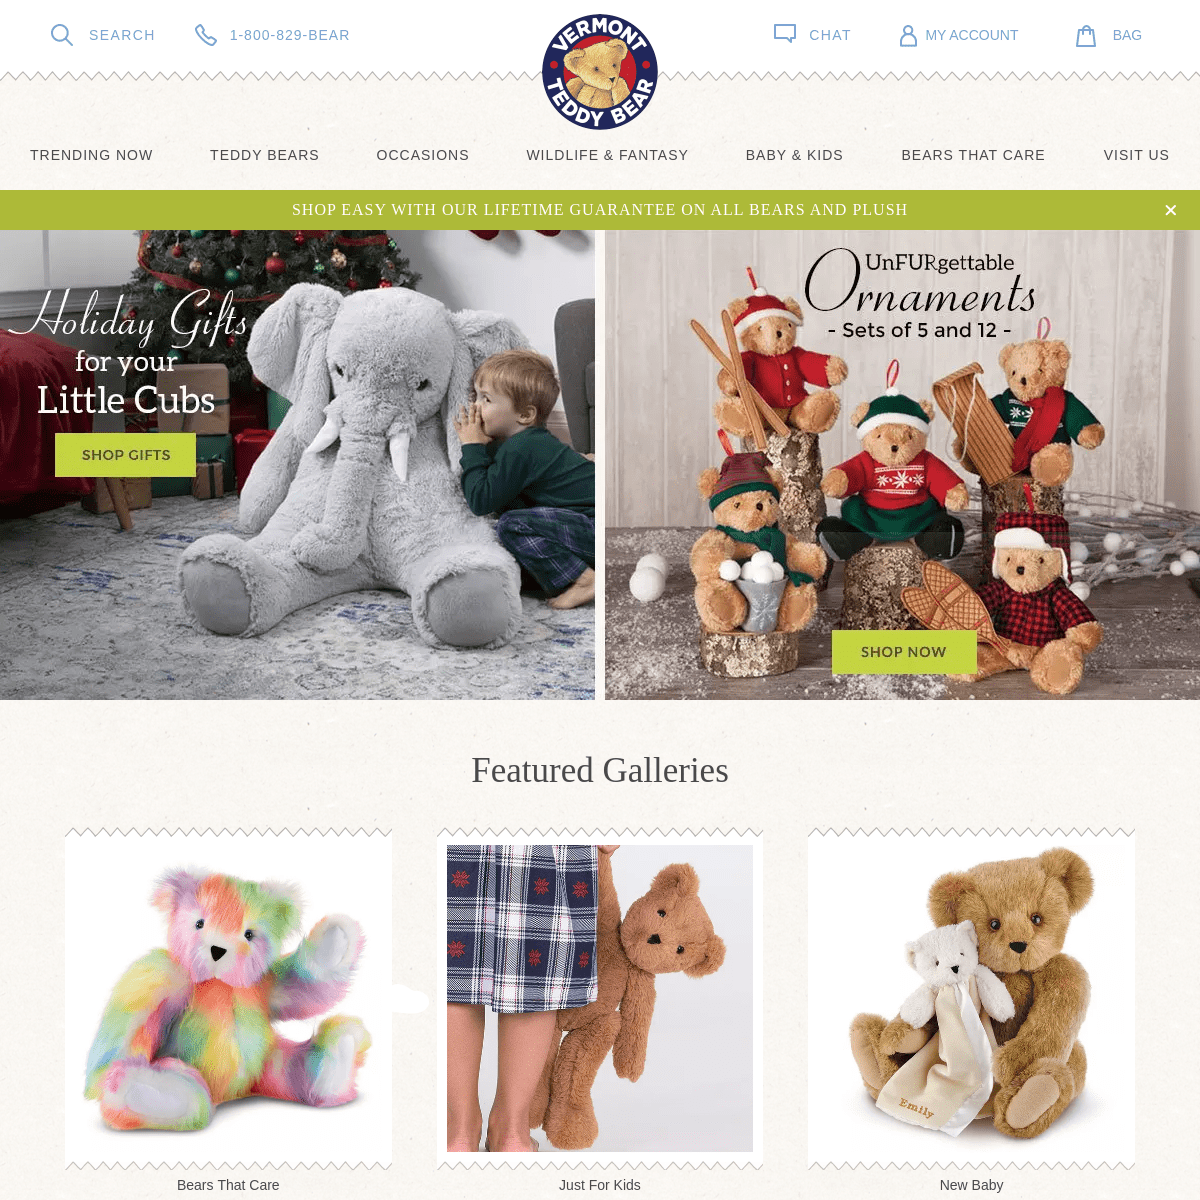 A complete backup of vermontteddybear.com